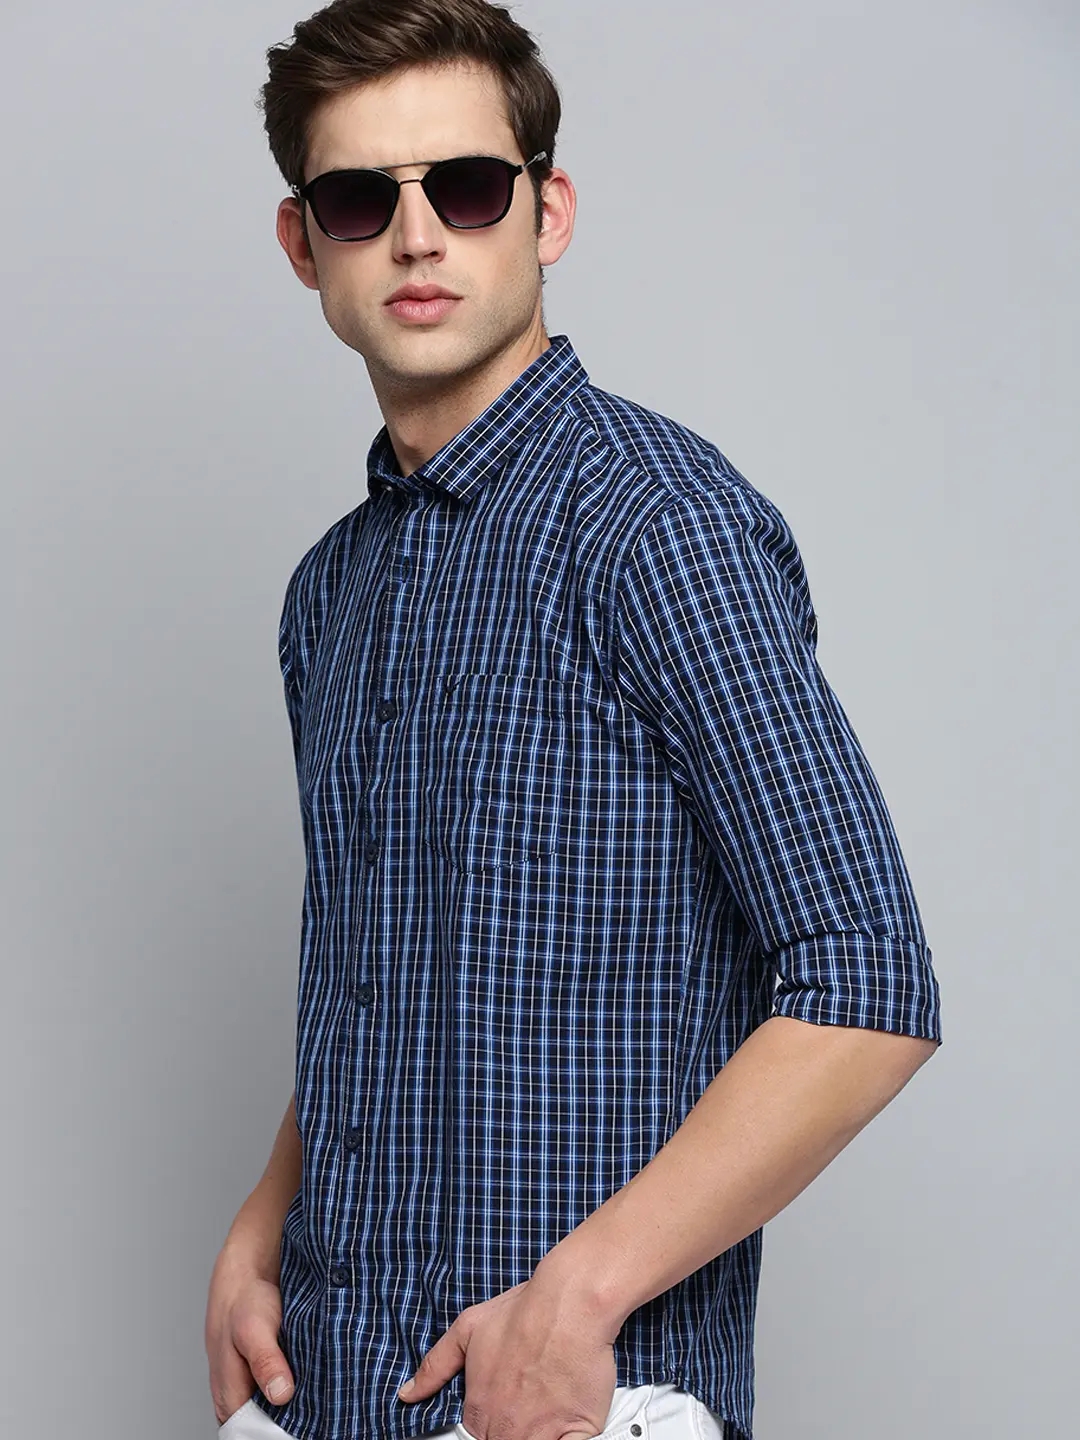 SHOWOFF Men's Spread Collar Checked Navy Blue Classic Shirt